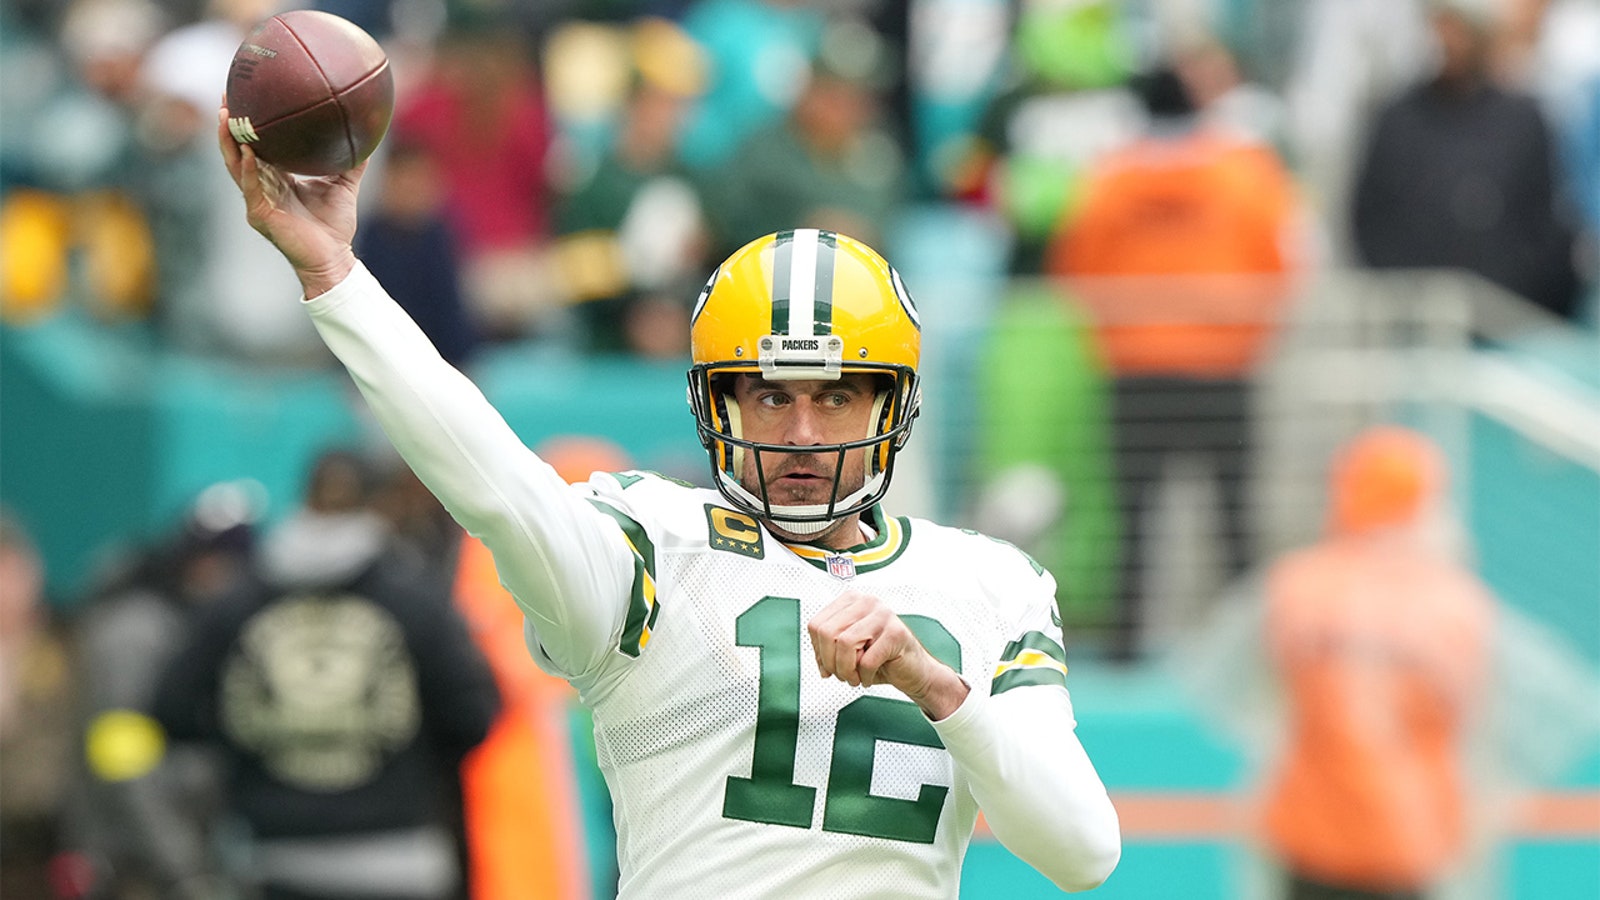 Aaron Rodgers outperforms Tua Tagovailoa as Packers hold off Dolphins, 26-20